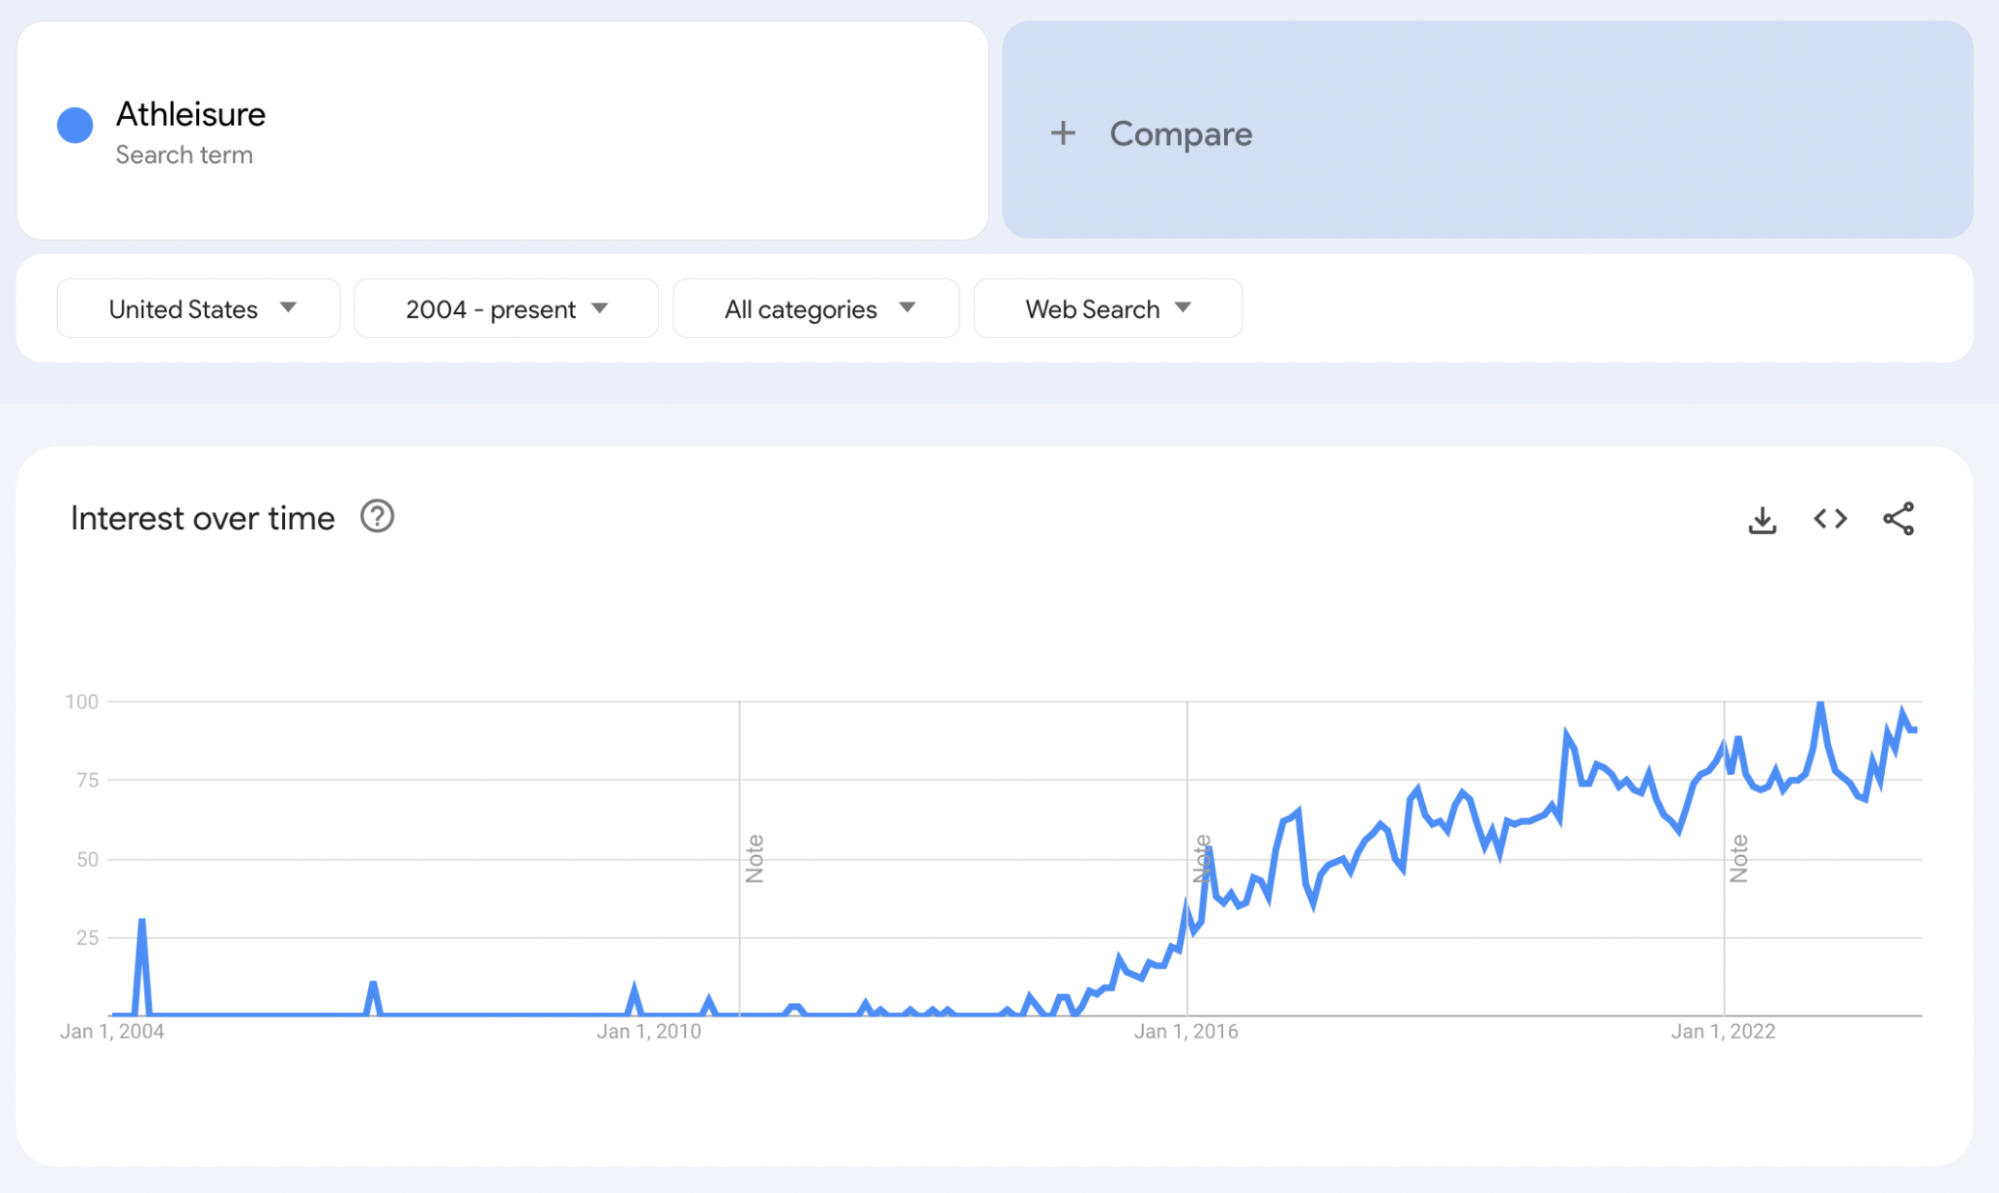 Google Trends report for “athleisure”.